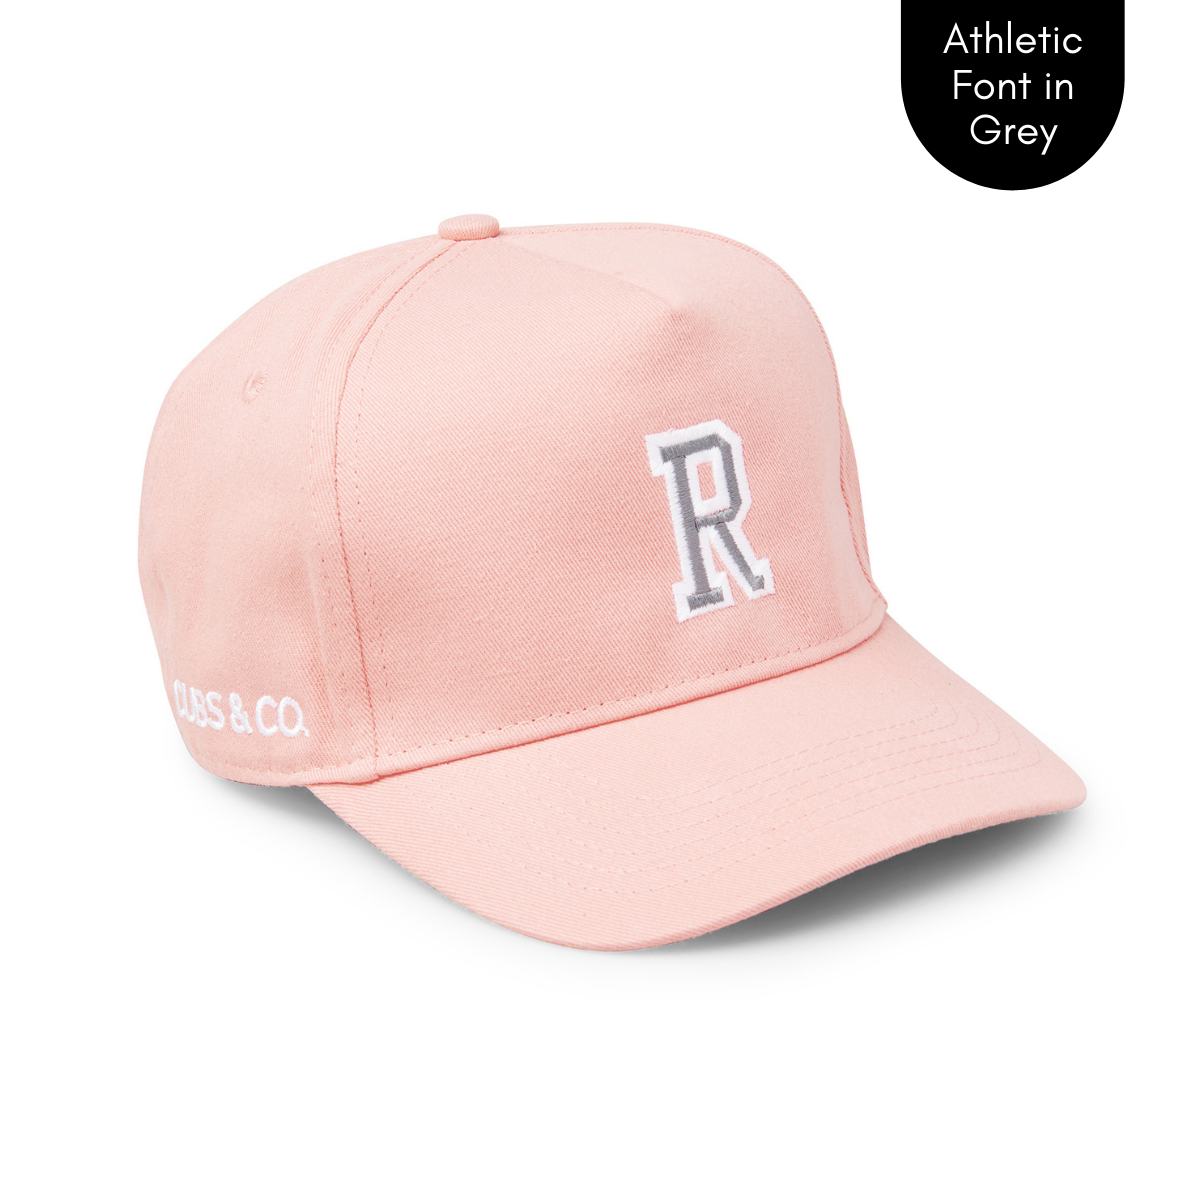 Cubs & Co - PERSONALISED PINK W/ INITIALS | ATHLETIC GREY FONT